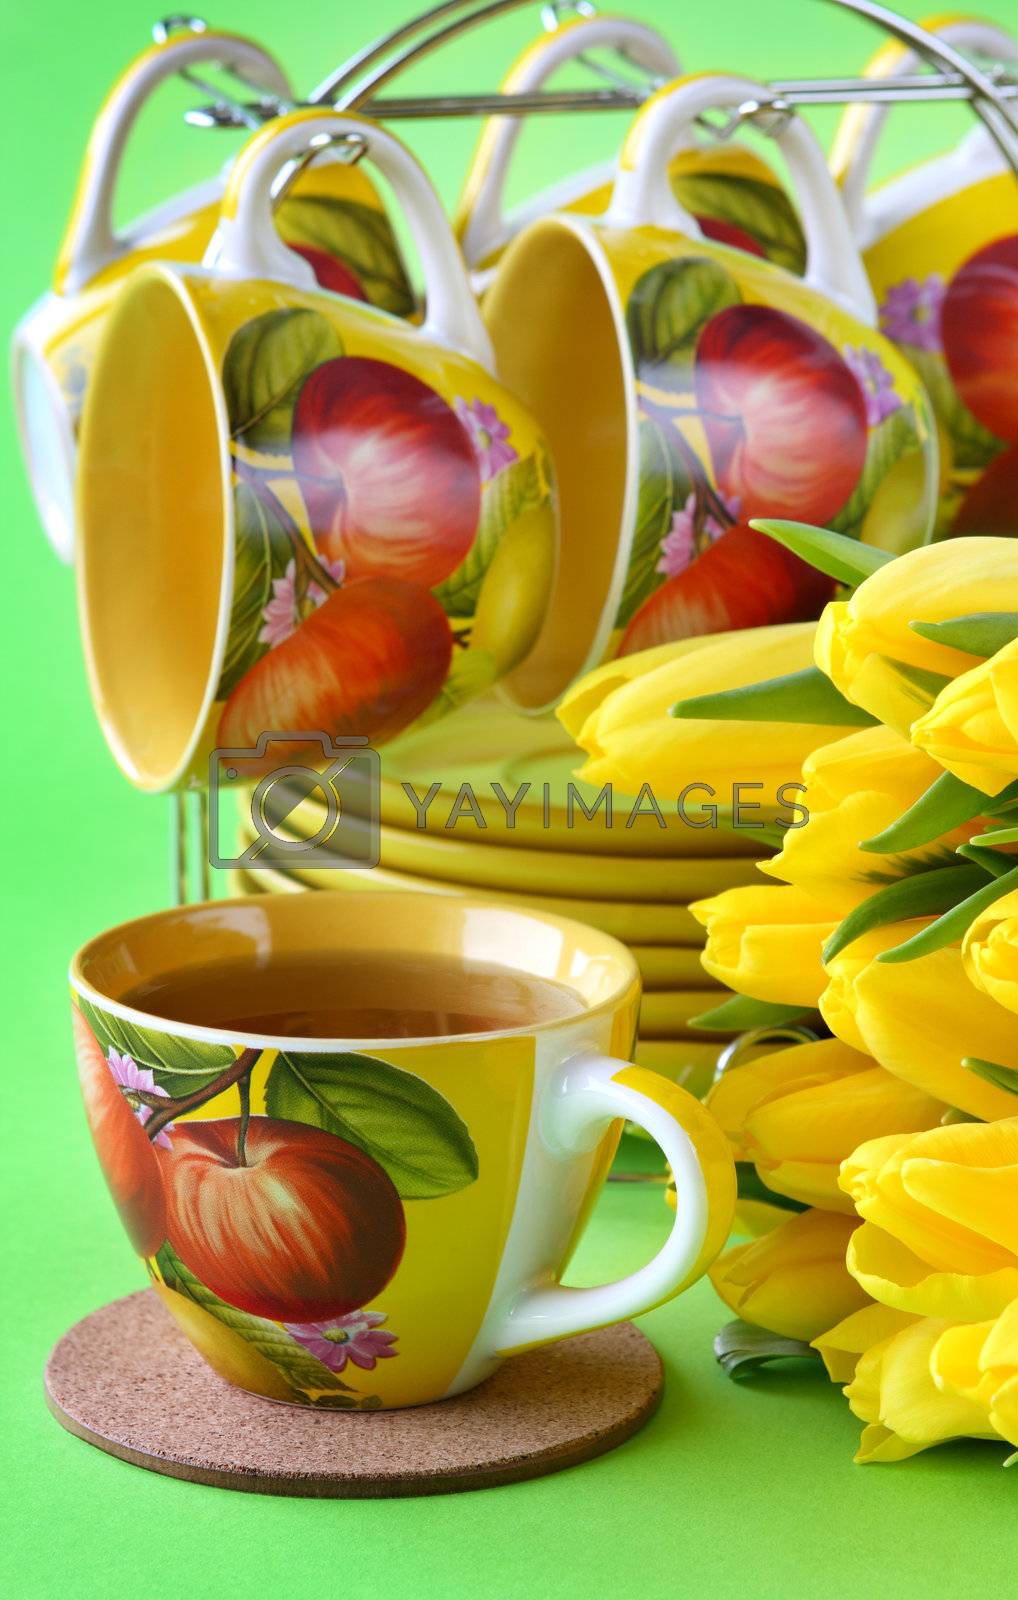 Royalty free image of Tea cups and yellow tulips by pozitivstudija